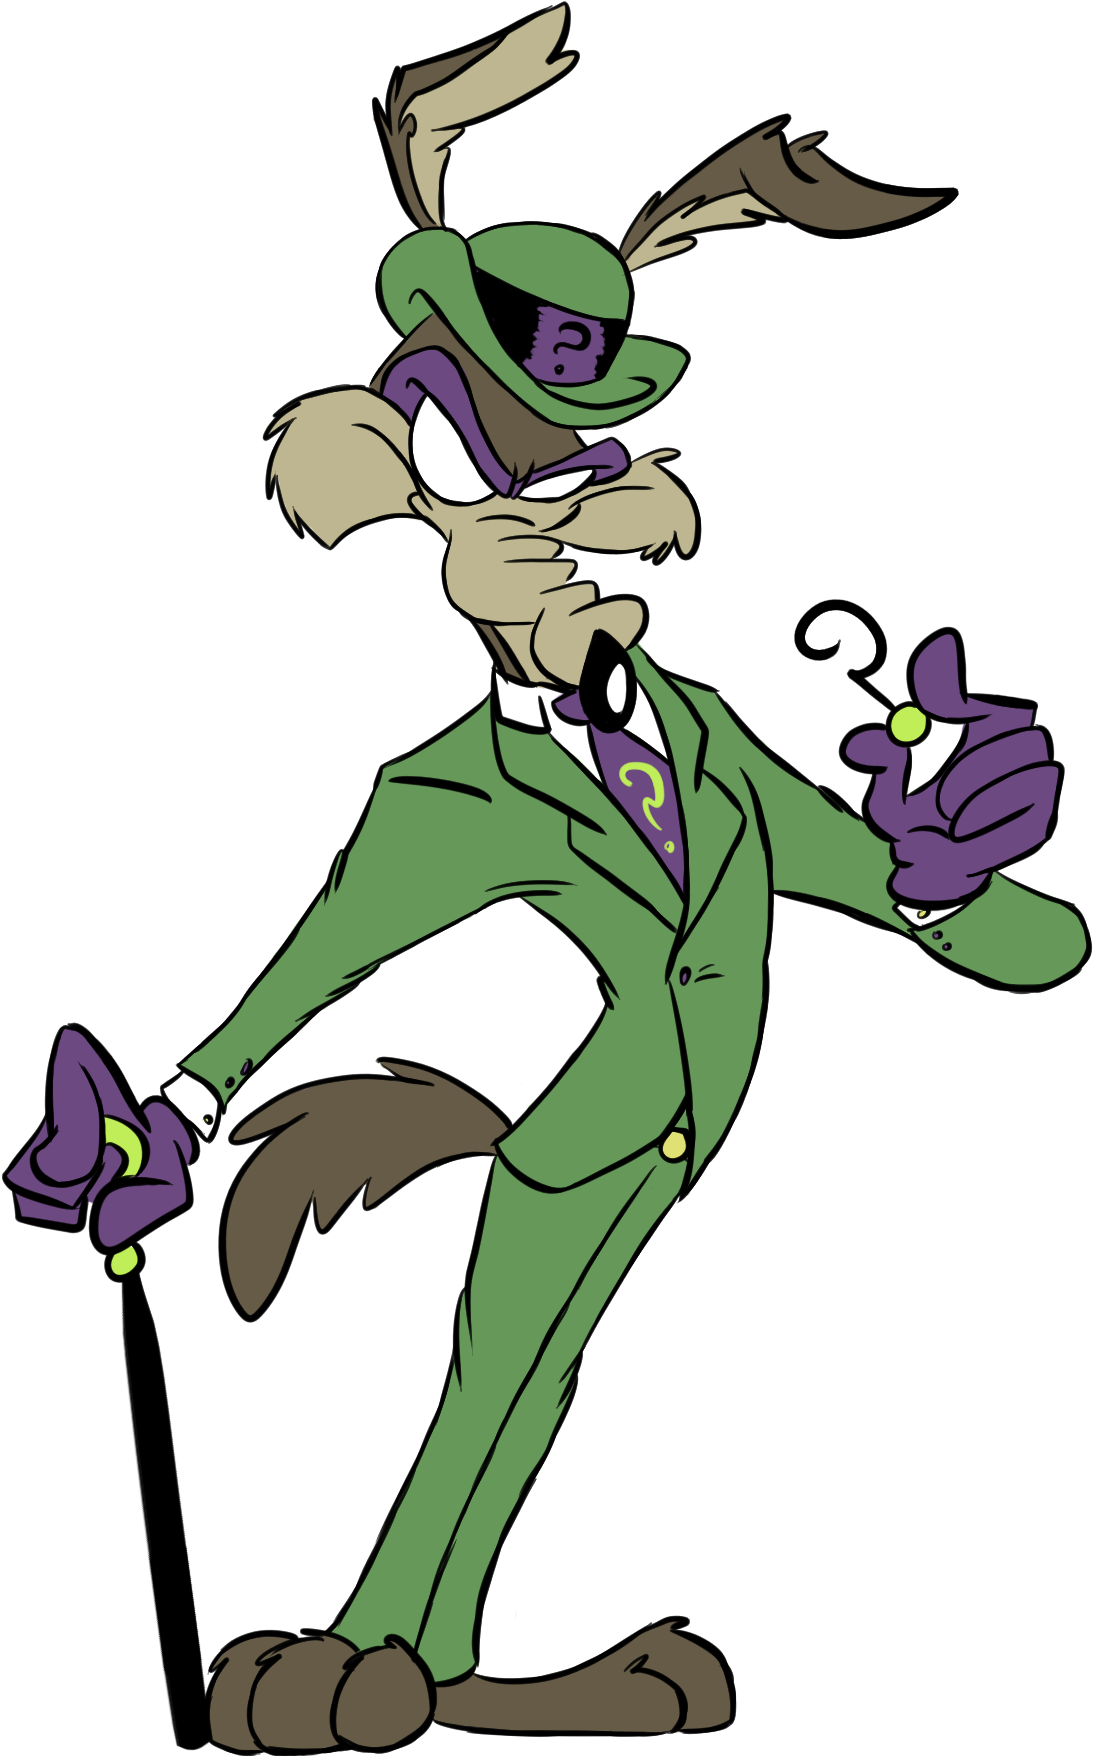 Riddler E Coyote - Wile E Coyote In A Suit (1417x1814)